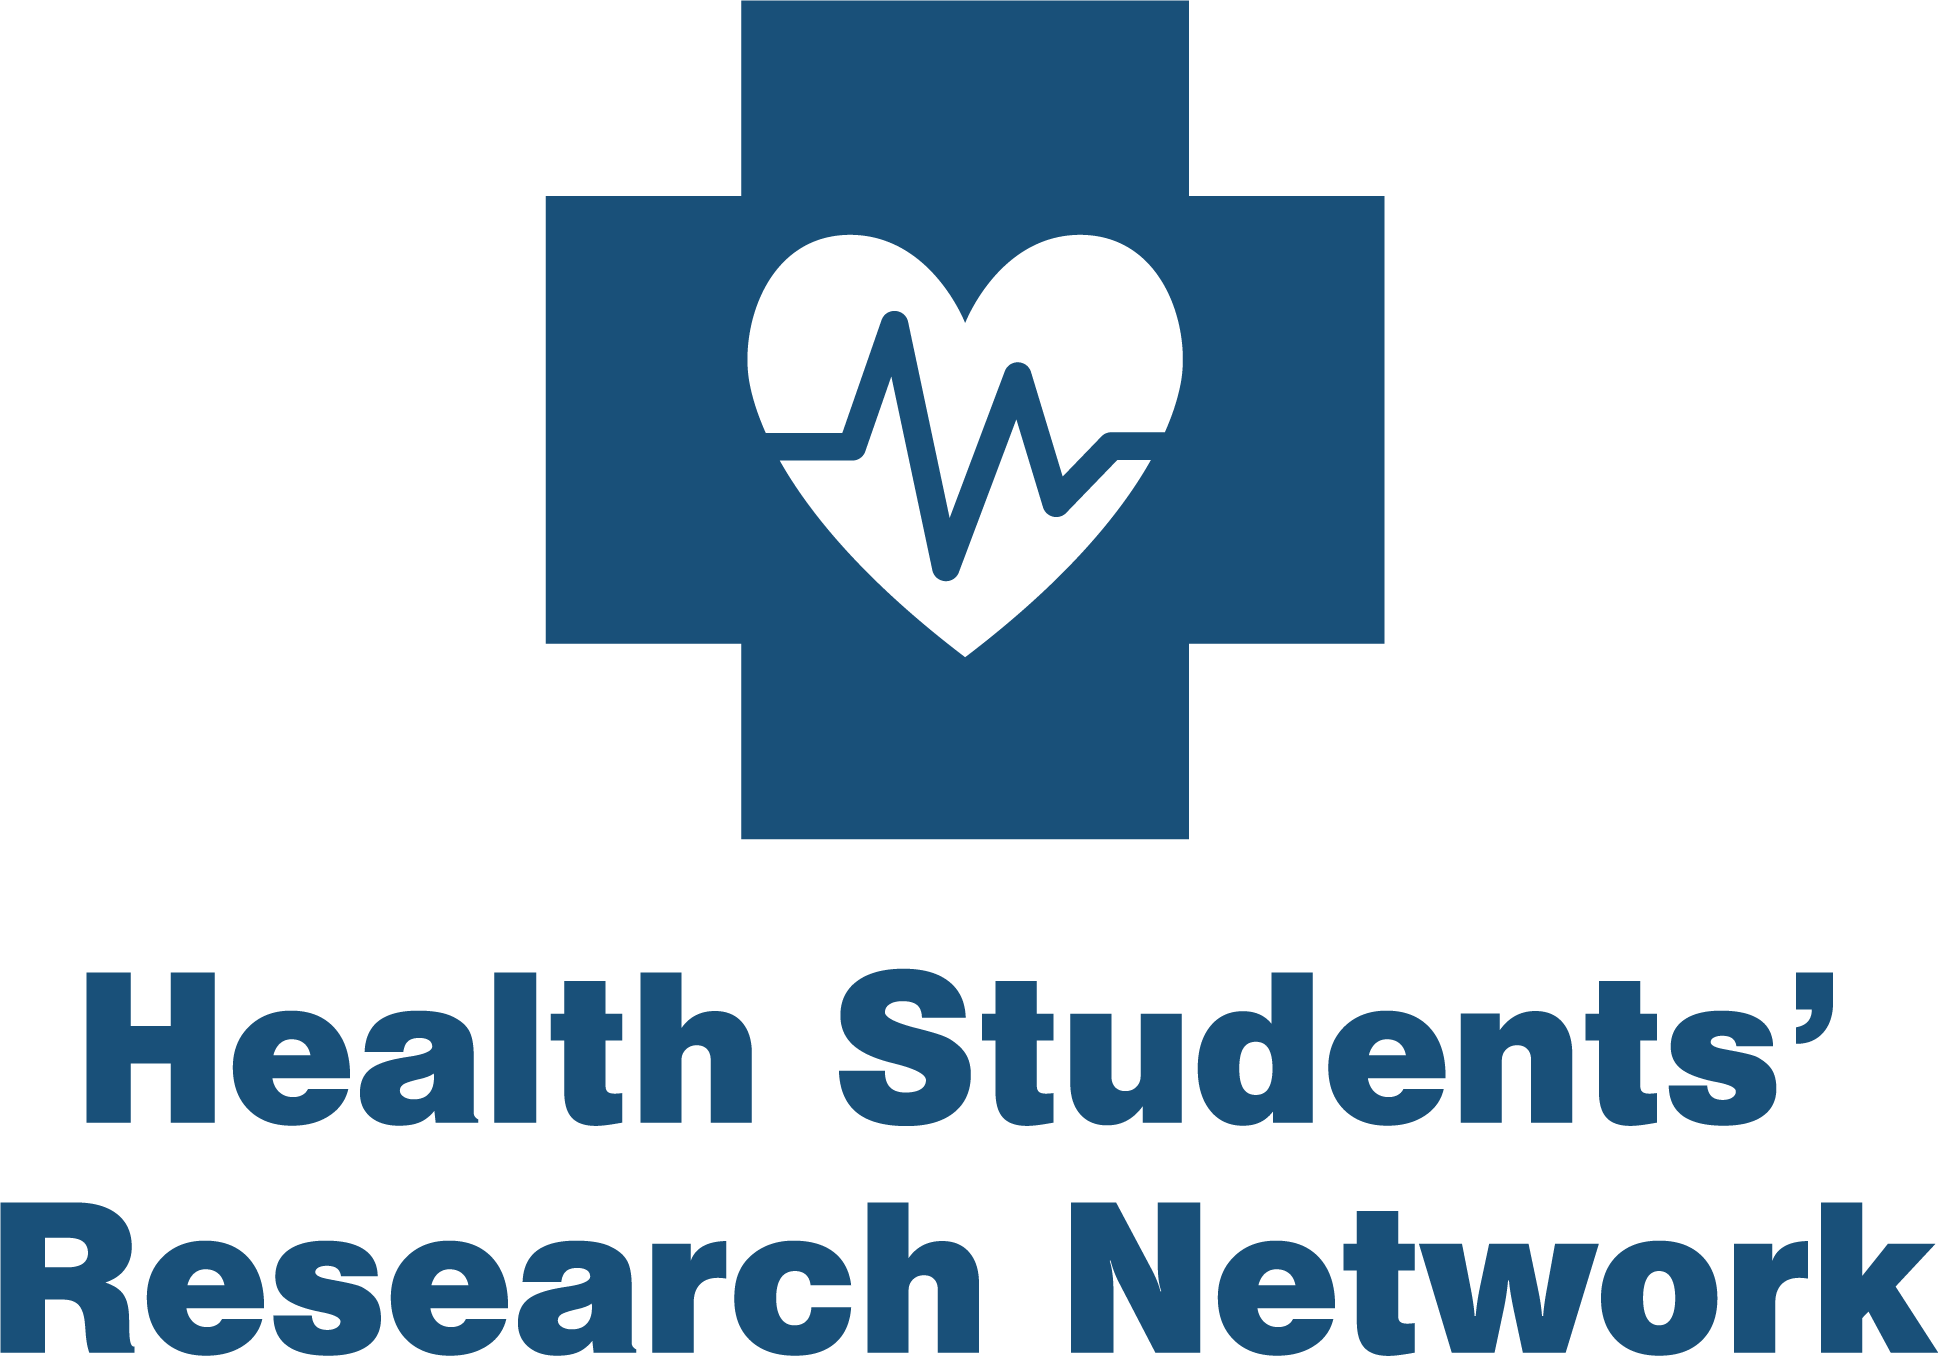 Health Students Research Network